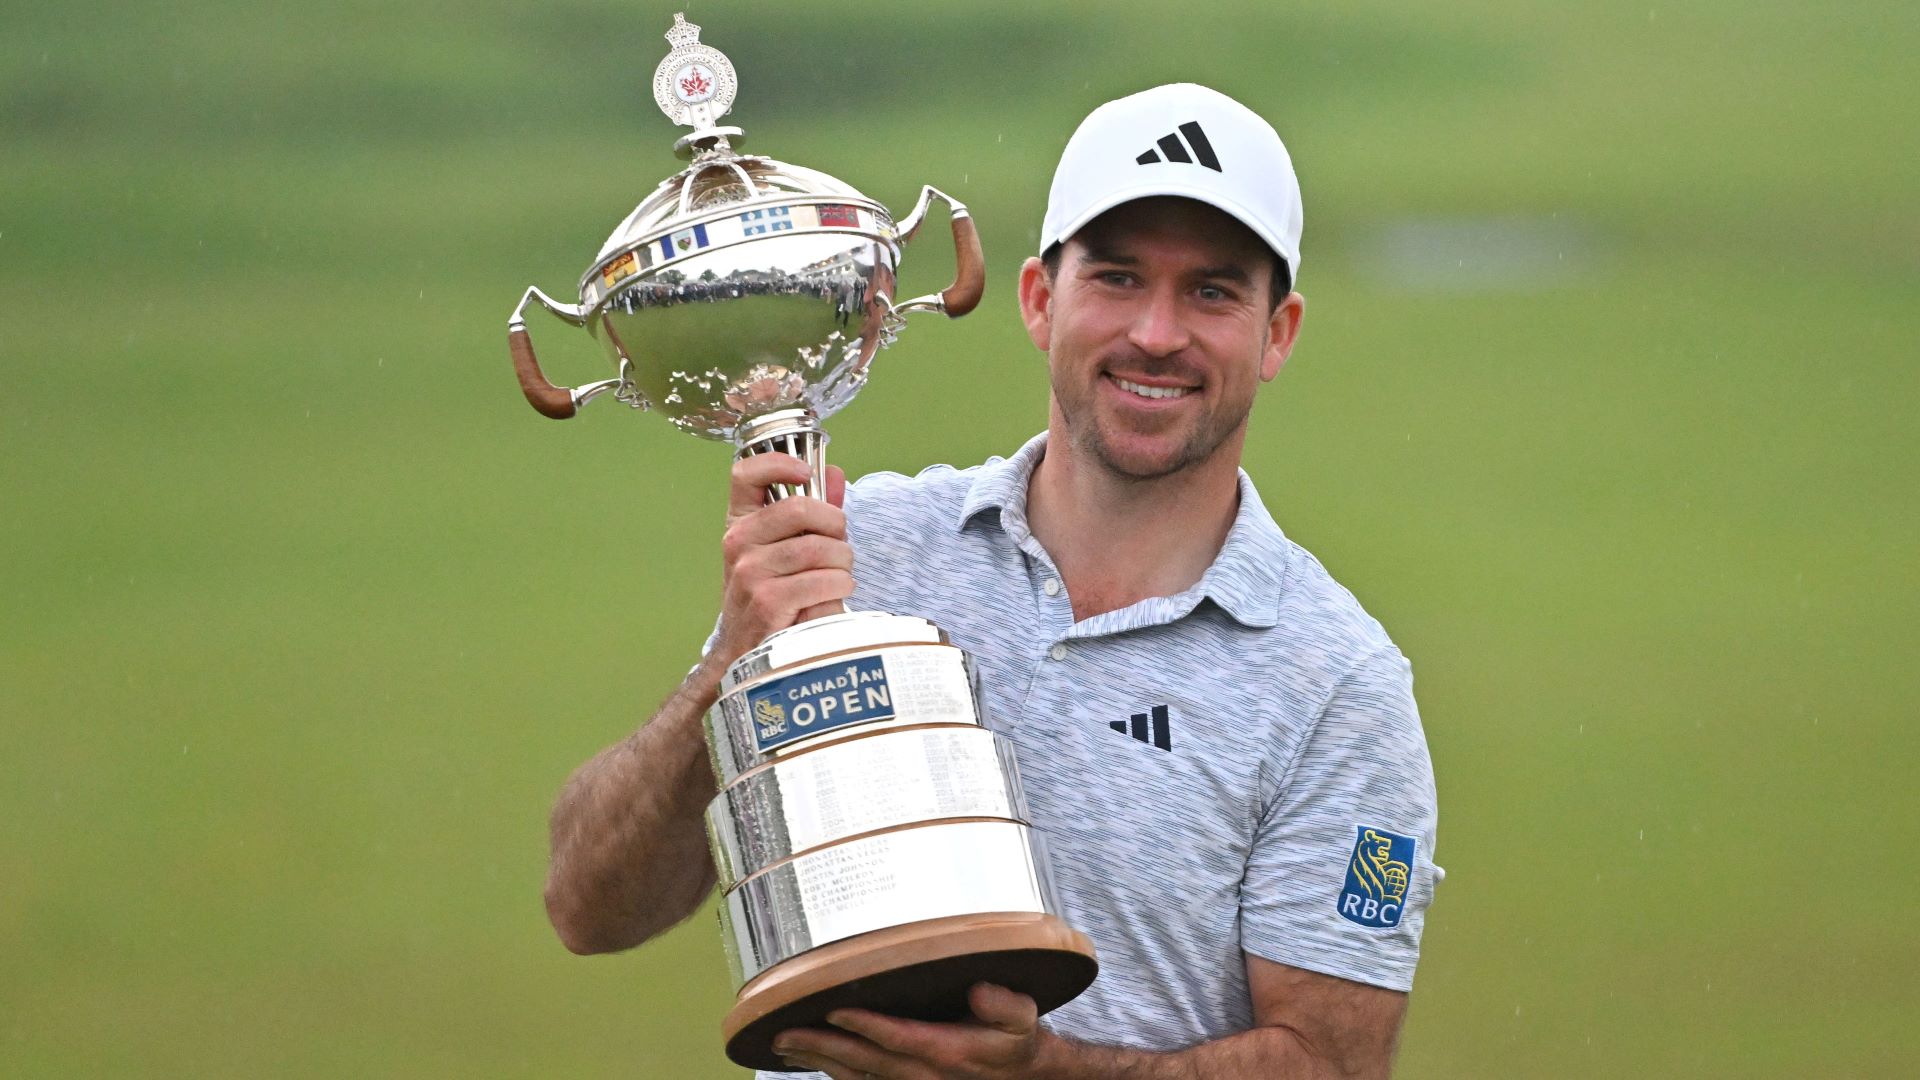 Nick Taylor Overcomes Massive Odds In Historic Win At RBC Canadian Open